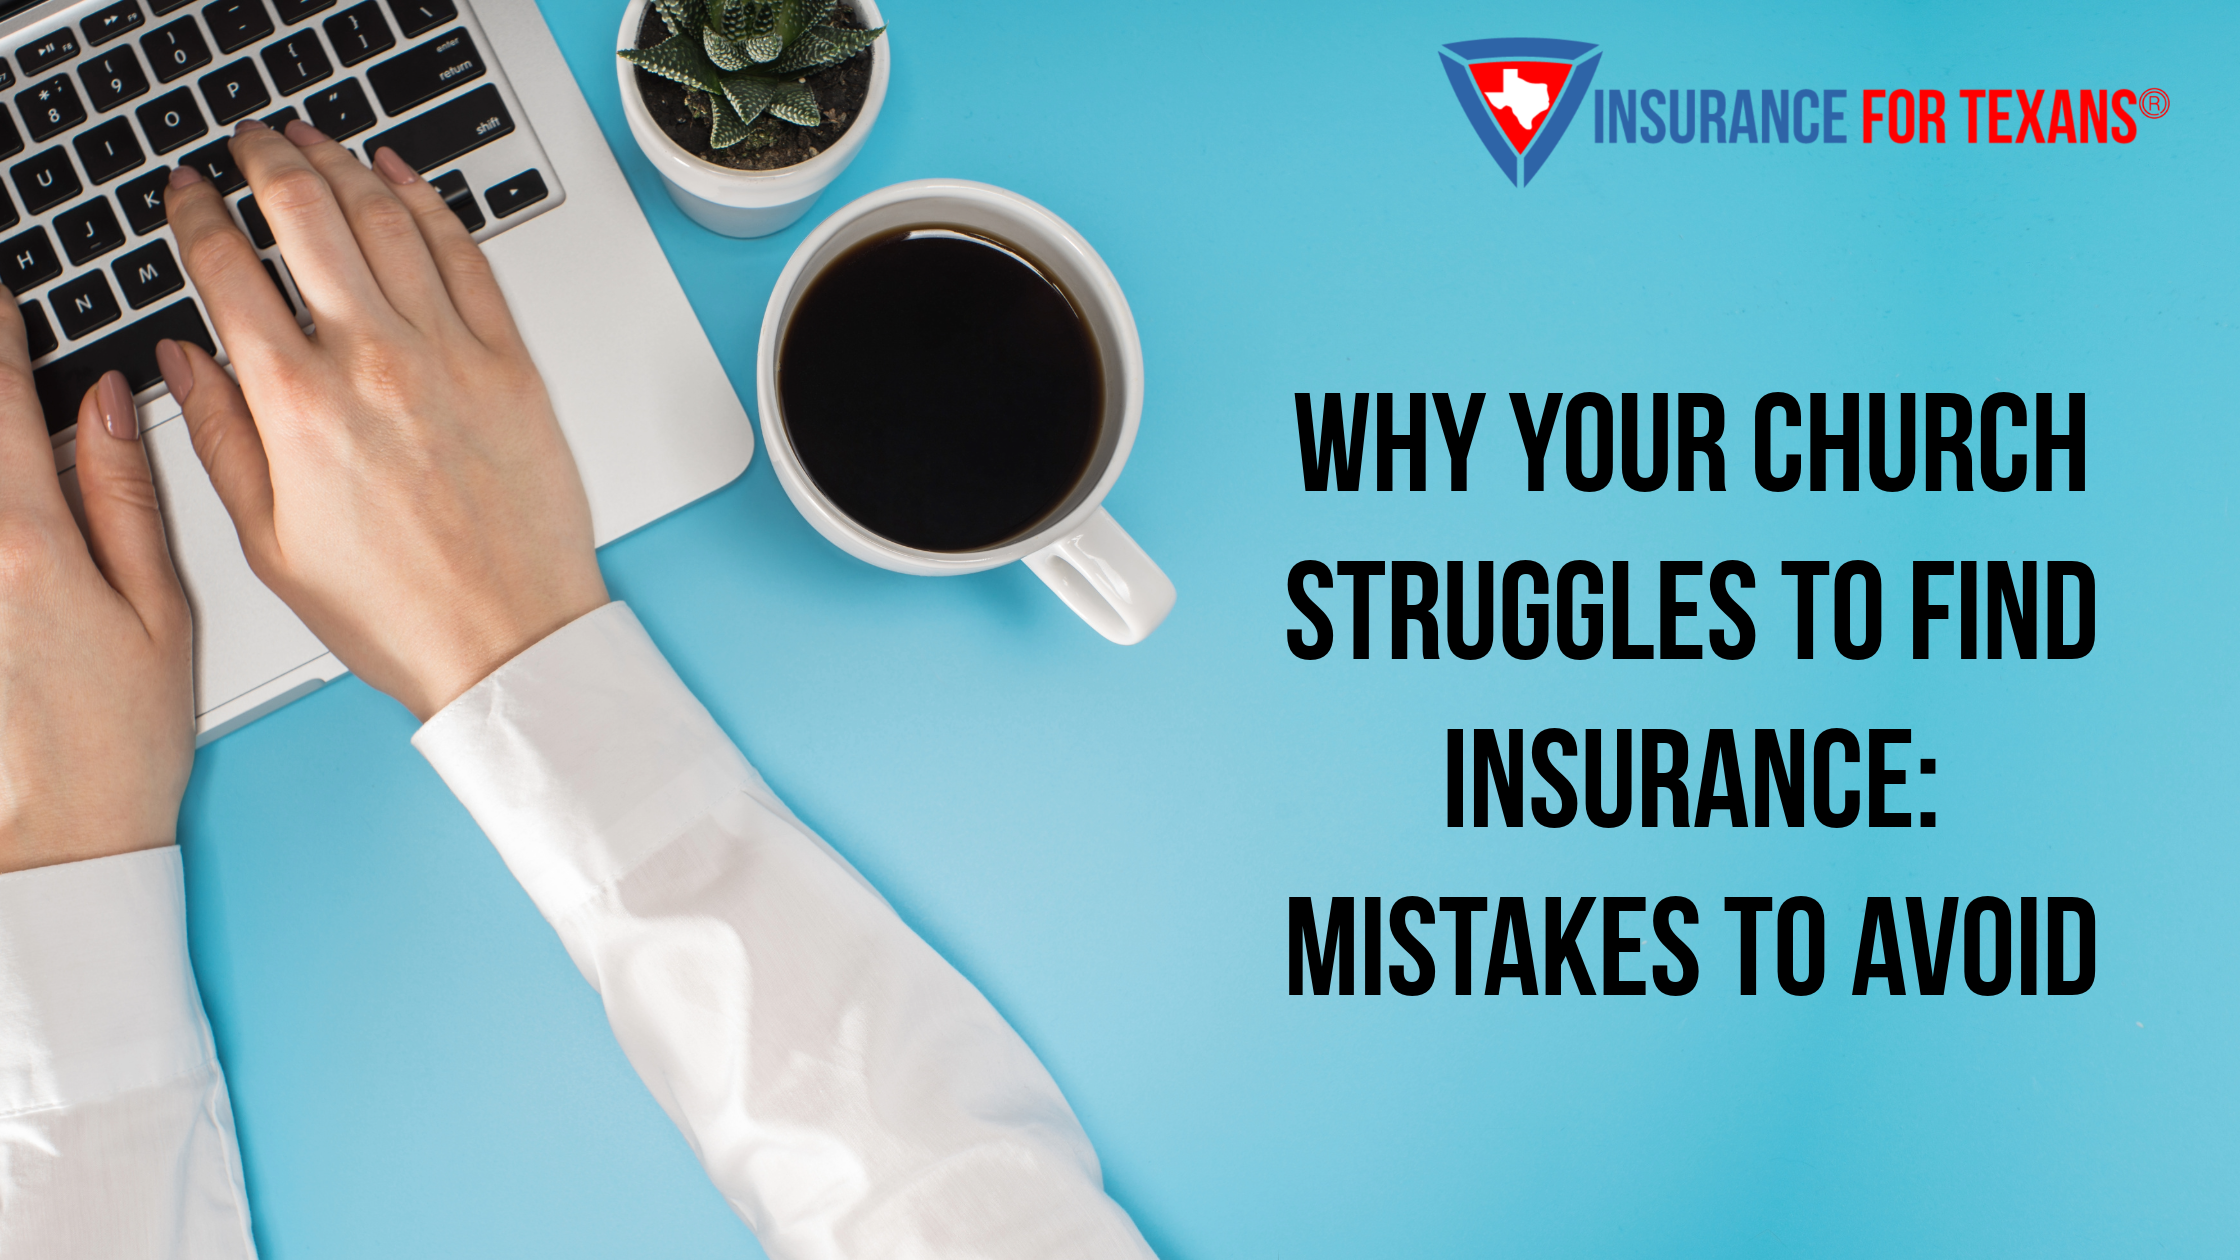 Why Your Church Struggles to Find Insurance: Mistakes to Avoid